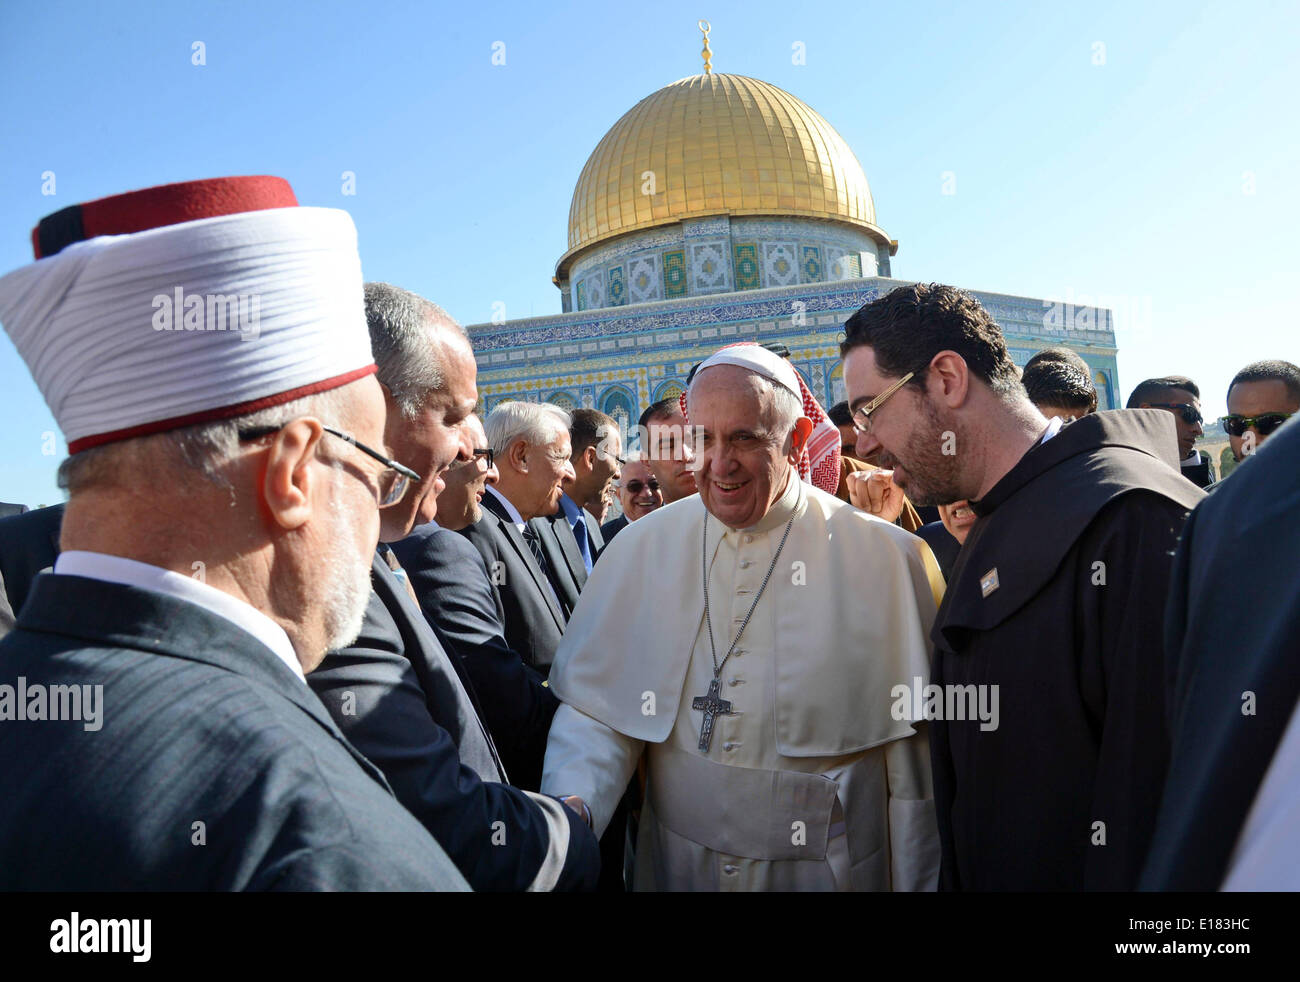 Jerusalem. 26th May, 2014. Pope Francis walks in front of the Dome of the Rock as he visits the Al-Aqsa Mosque compound, in Jerusalem's Old City on May 25, 2014. In his first Middle East tour since his anointment in 2013, Pope Francis held a historic prayer service with the Ecumenical Patriarch in Jerusalem on Sunday. This was the first reunion between the two Christian sects in fifty years. (Handout Credit:  Handout Haim Zach-Israe/APA Images/ZUMAPRESS.com/Alamy Live News Stock Photo